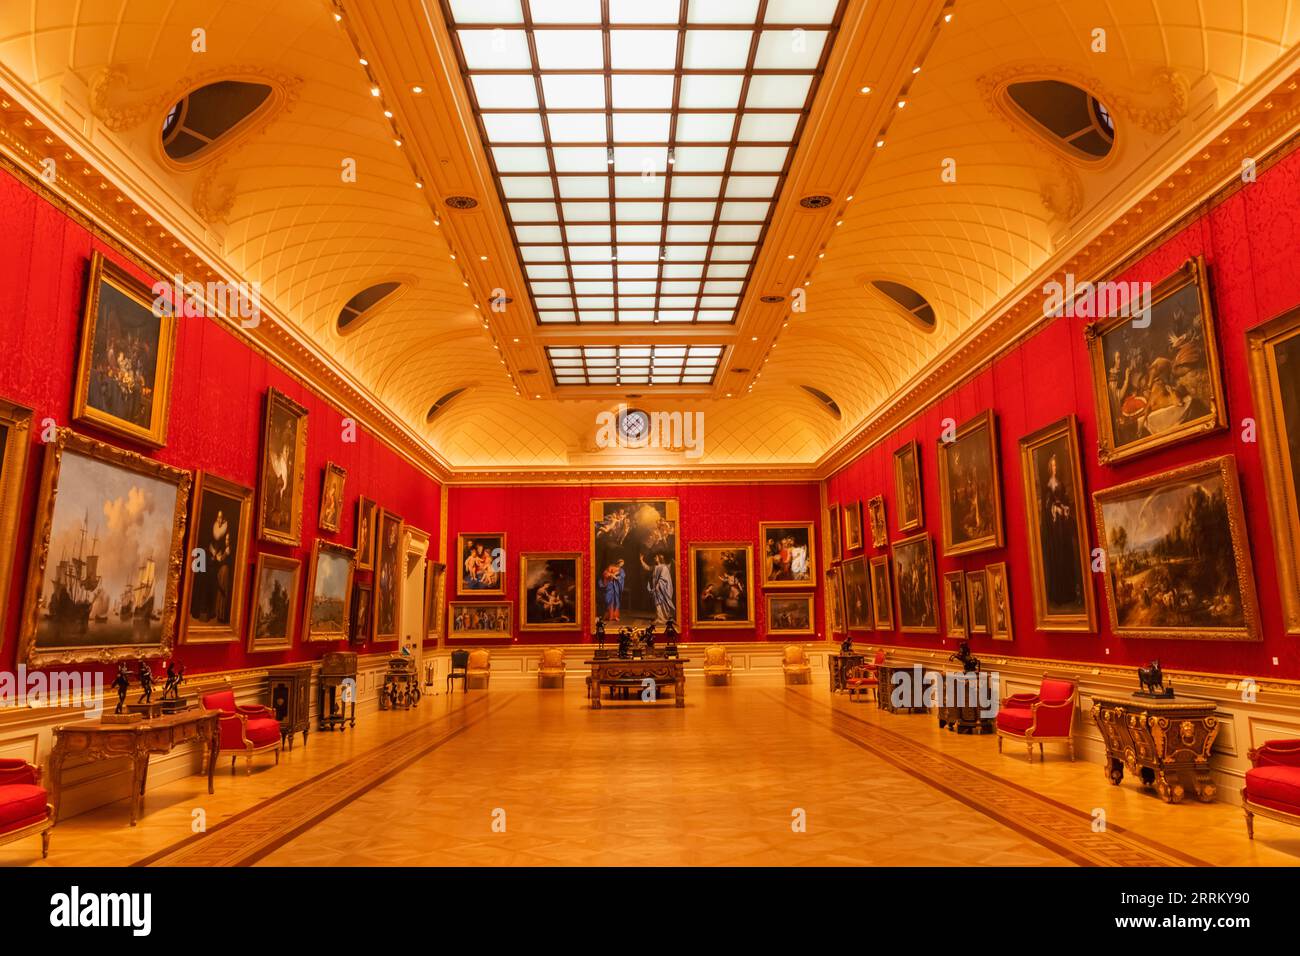 England, London, Heartford House, The Wallace Collection Museum, Interior View of The Great Gallery Stock Photo